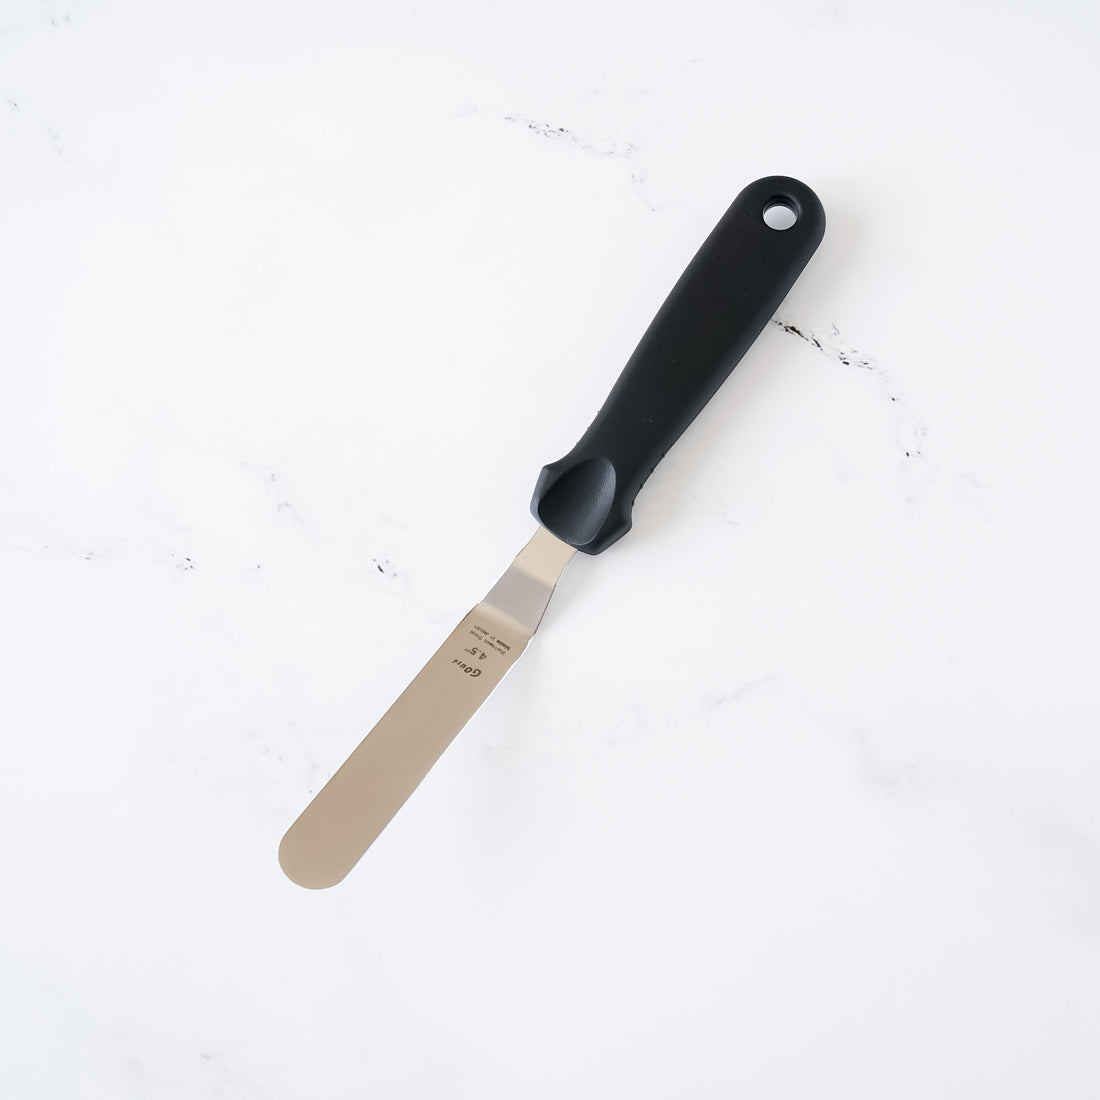 Offset Icing Spatula with Wood Handle 4 inches